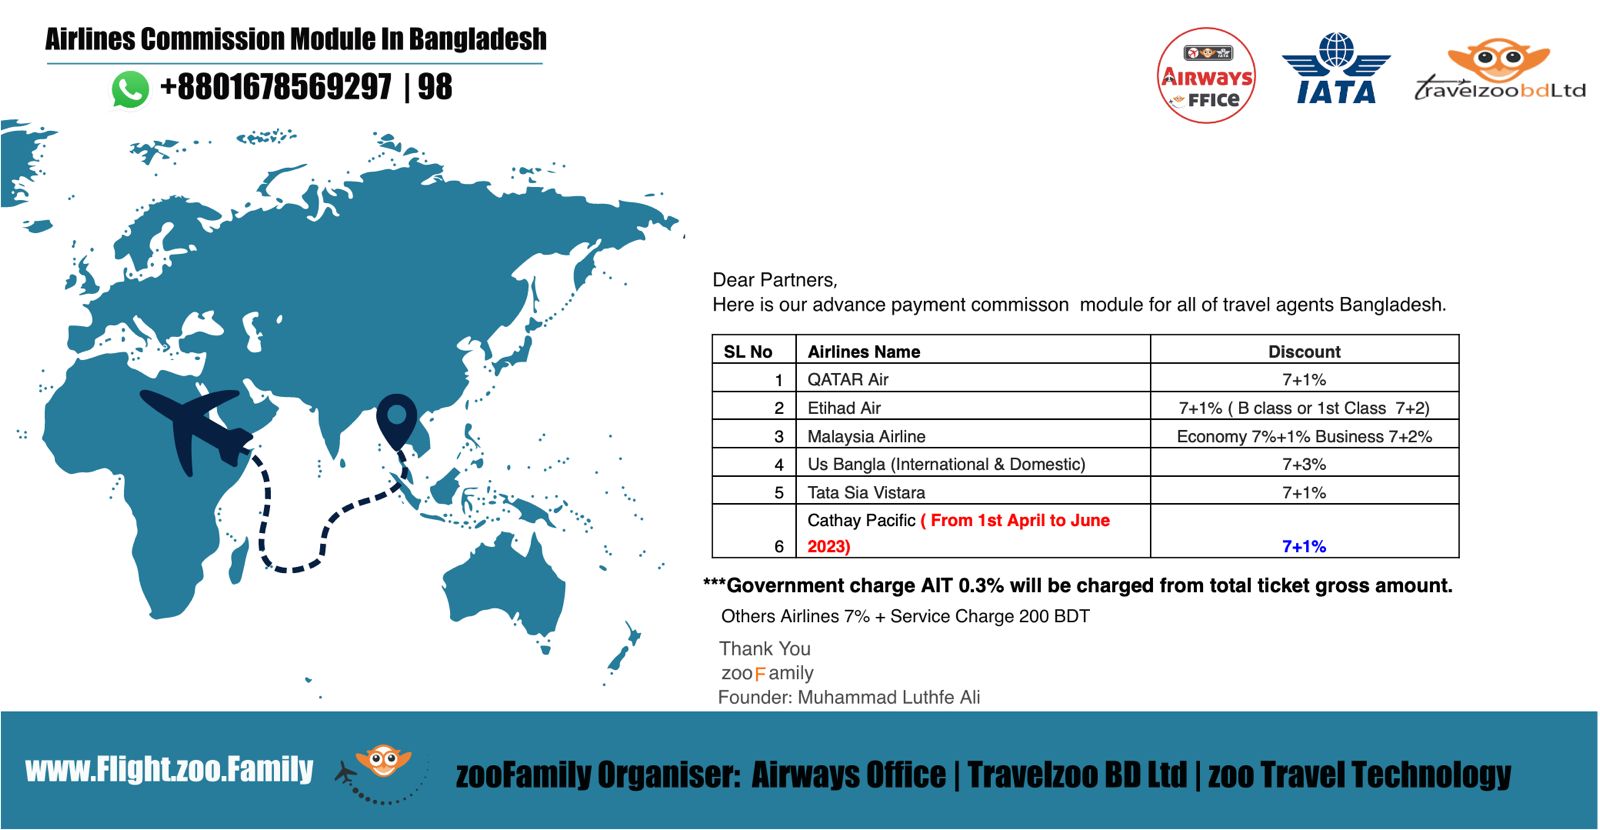 Air ticket commission from Bangladesh | Airlines Commission Module from Bangladesh